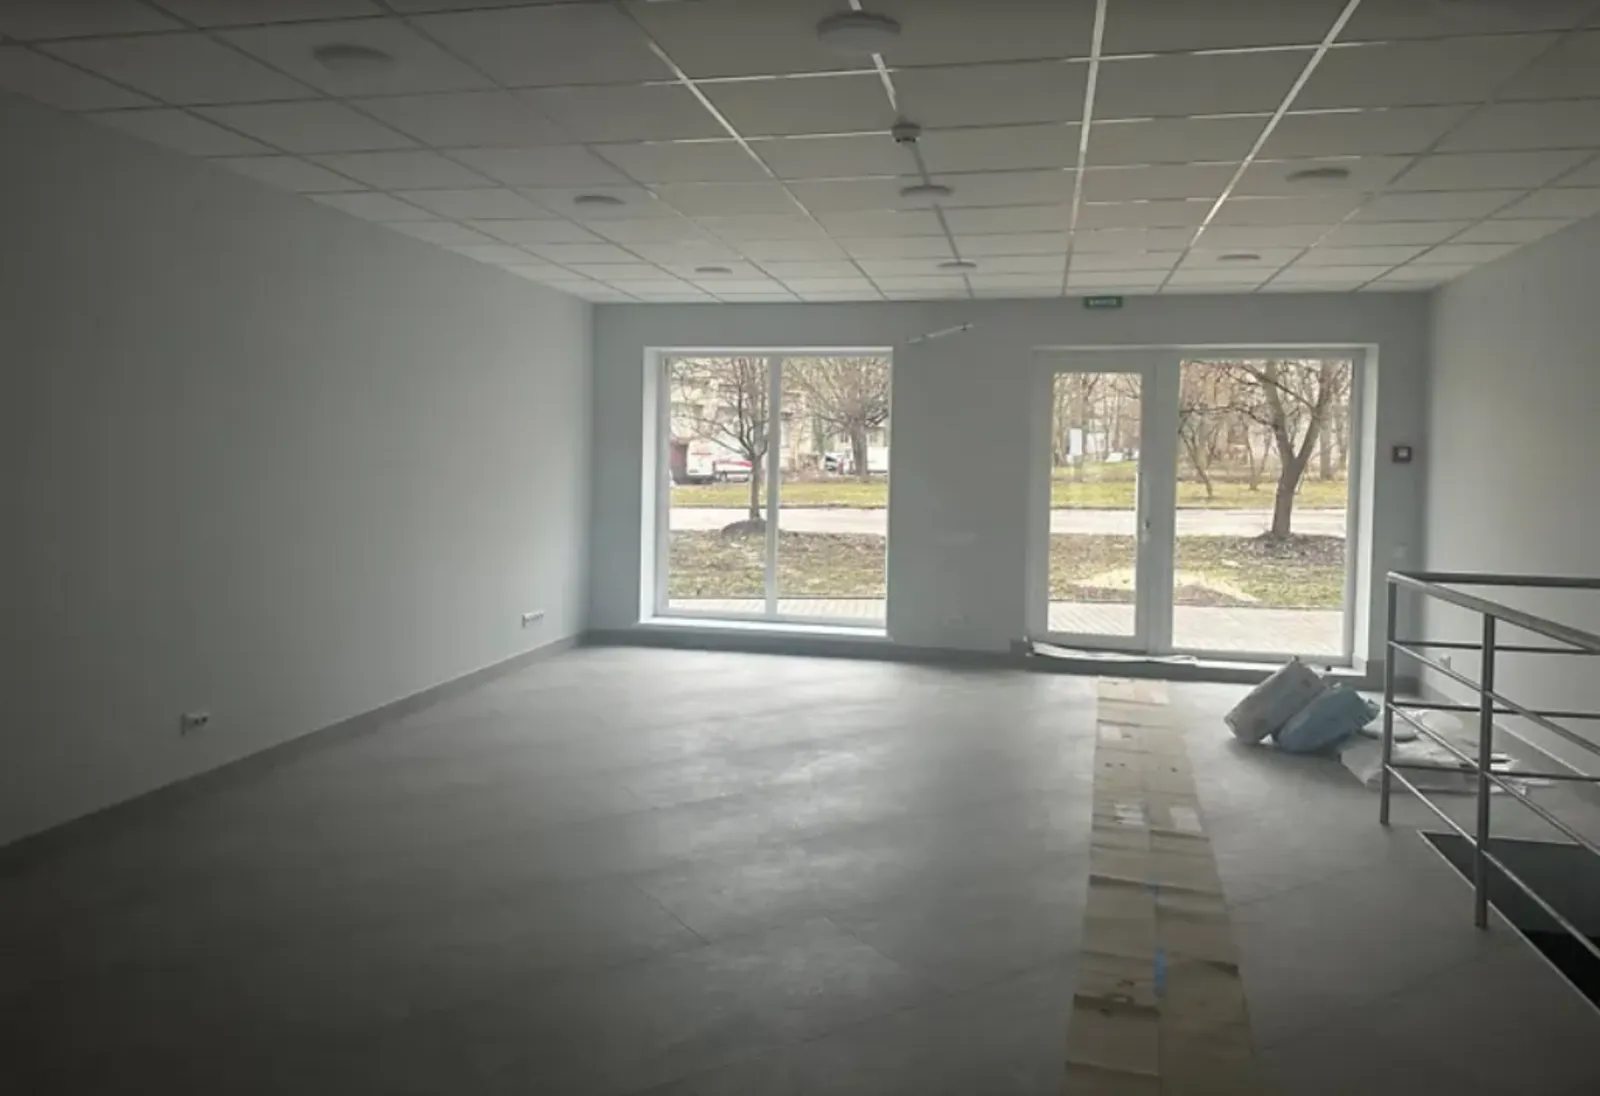 Real estate for sale for commercial purposes. 120 m², 1st floor/10 floors. Bam, Ternopil. 